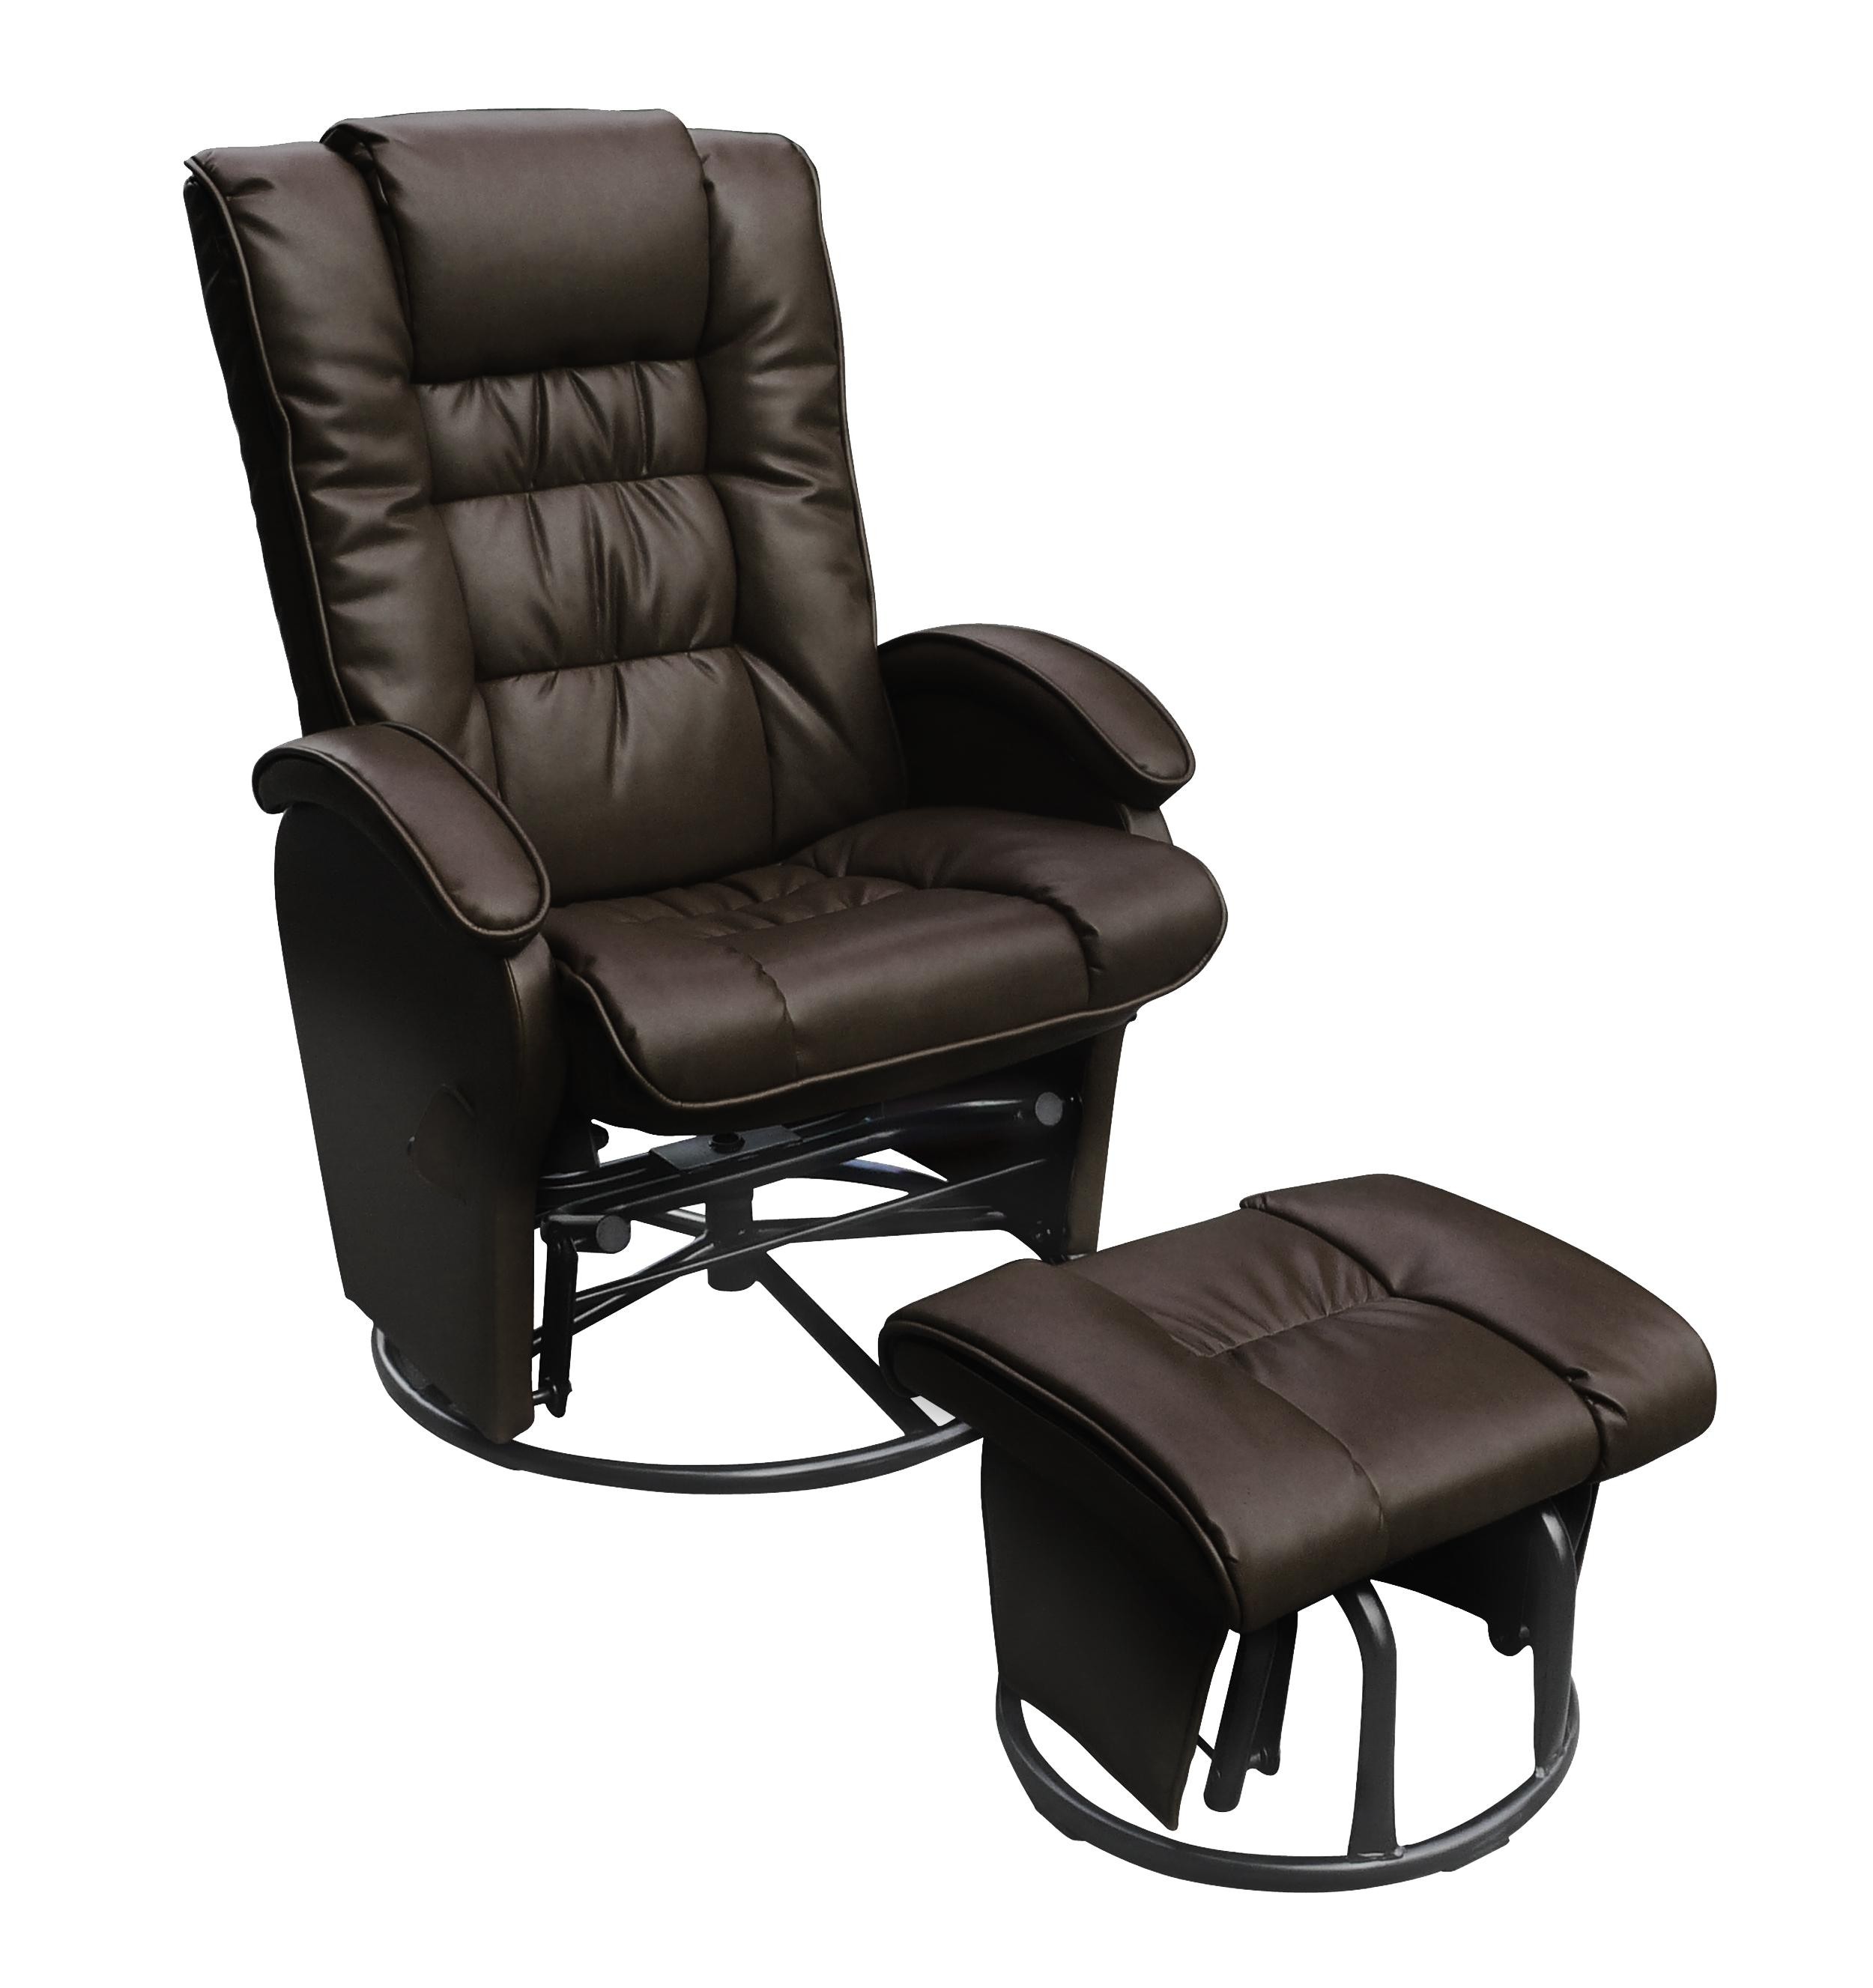 Push back recliner glider rocker with swivel and brake